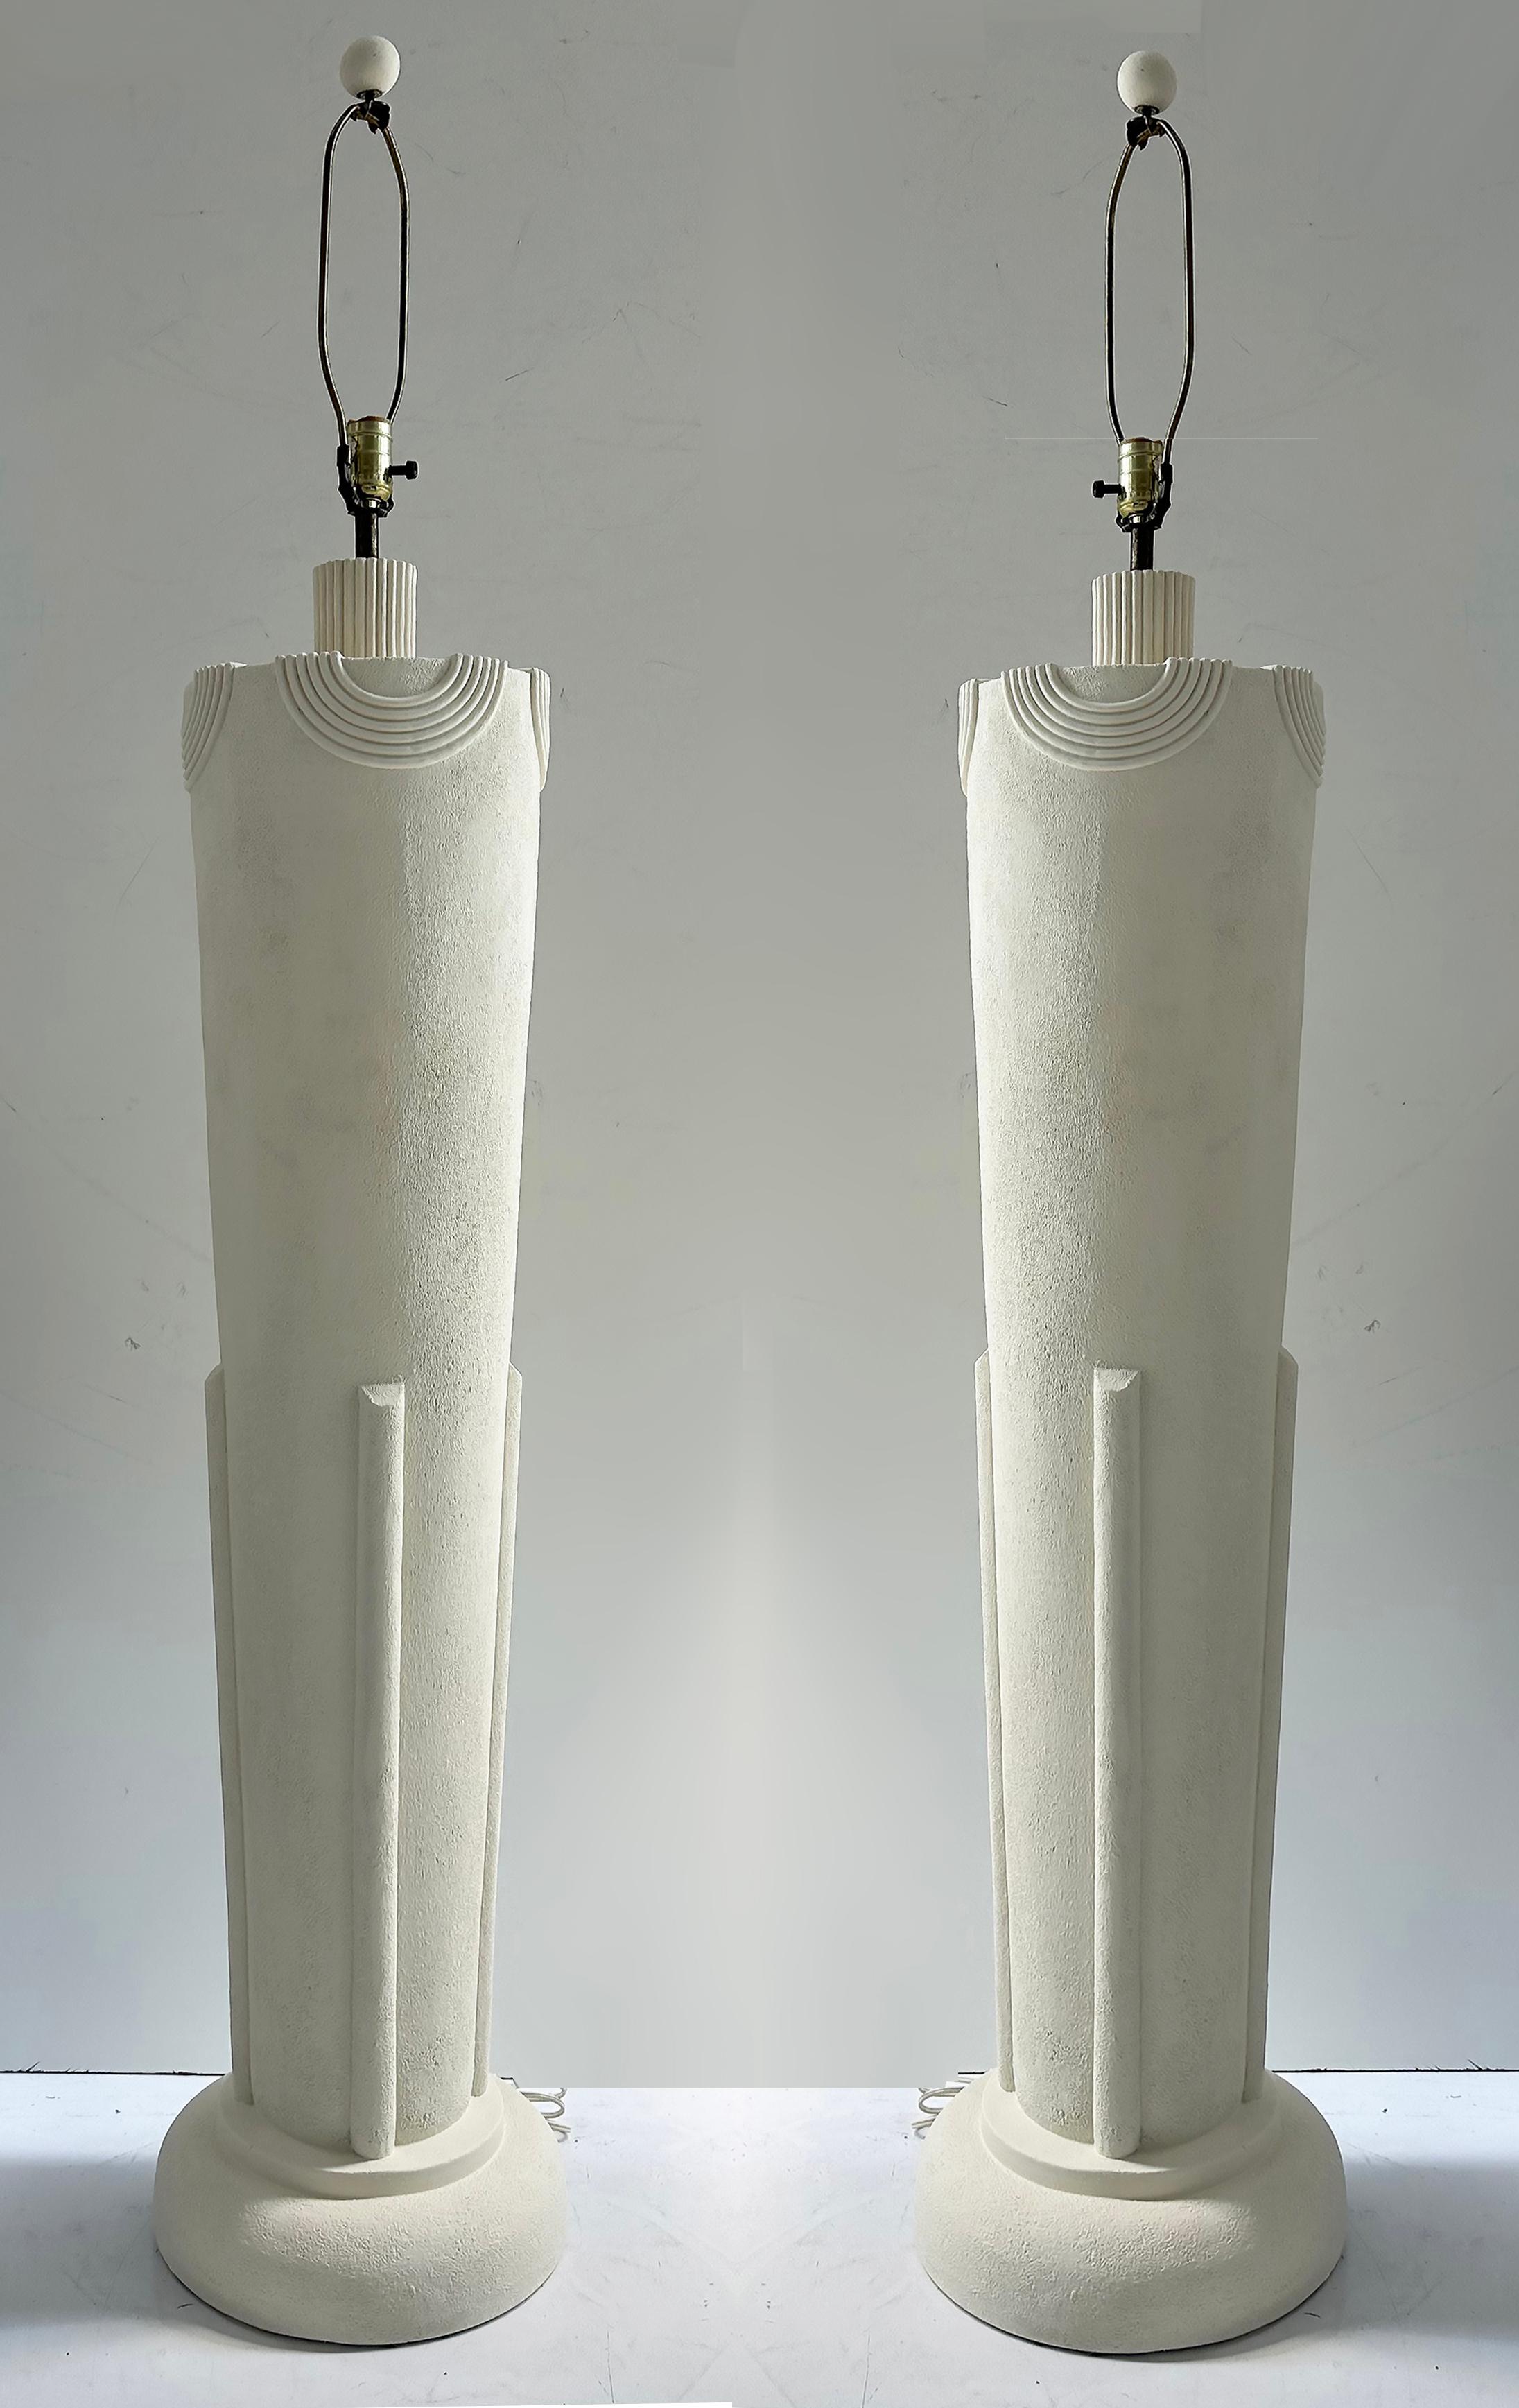 Postmodern Plaster Art Deco Revival Floor Lamps- a Pair

Offered for sale is a pair of substantial floor lamps that will add some vintage Art Deco Revival style to your decor. They are Postmodern in design and they have a raised finish with draped